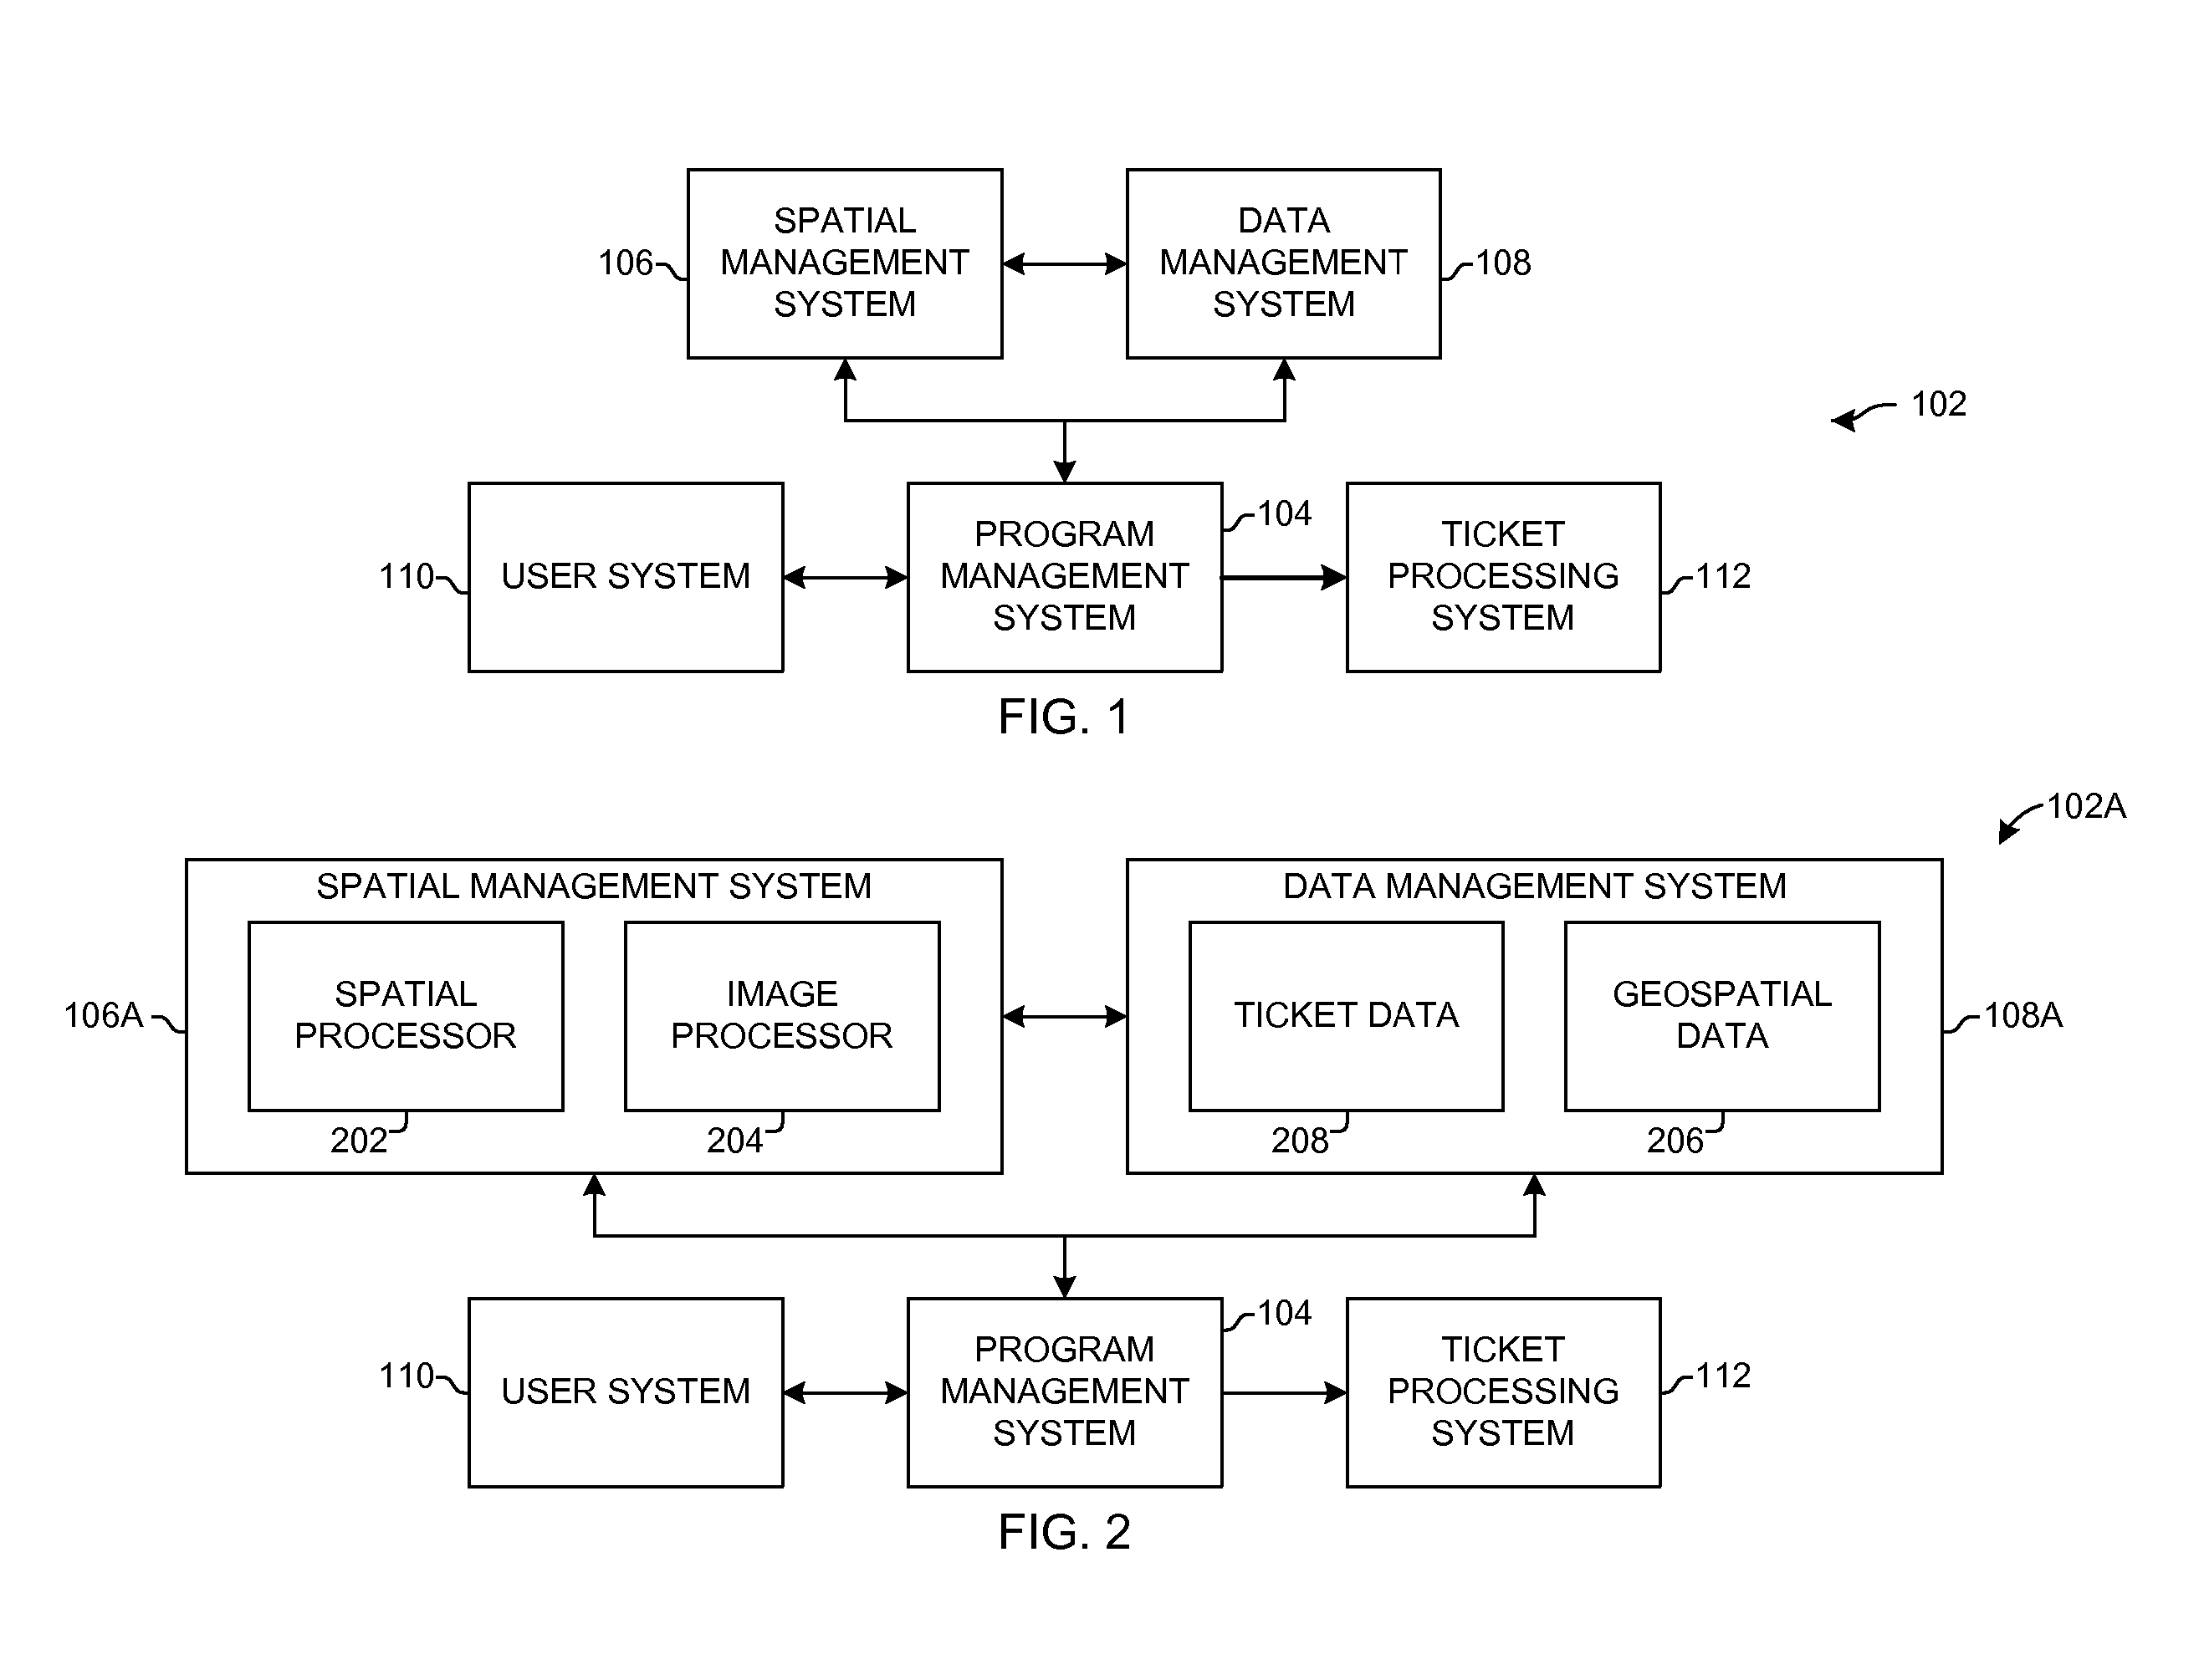 Ticket Entry Systems and Methods